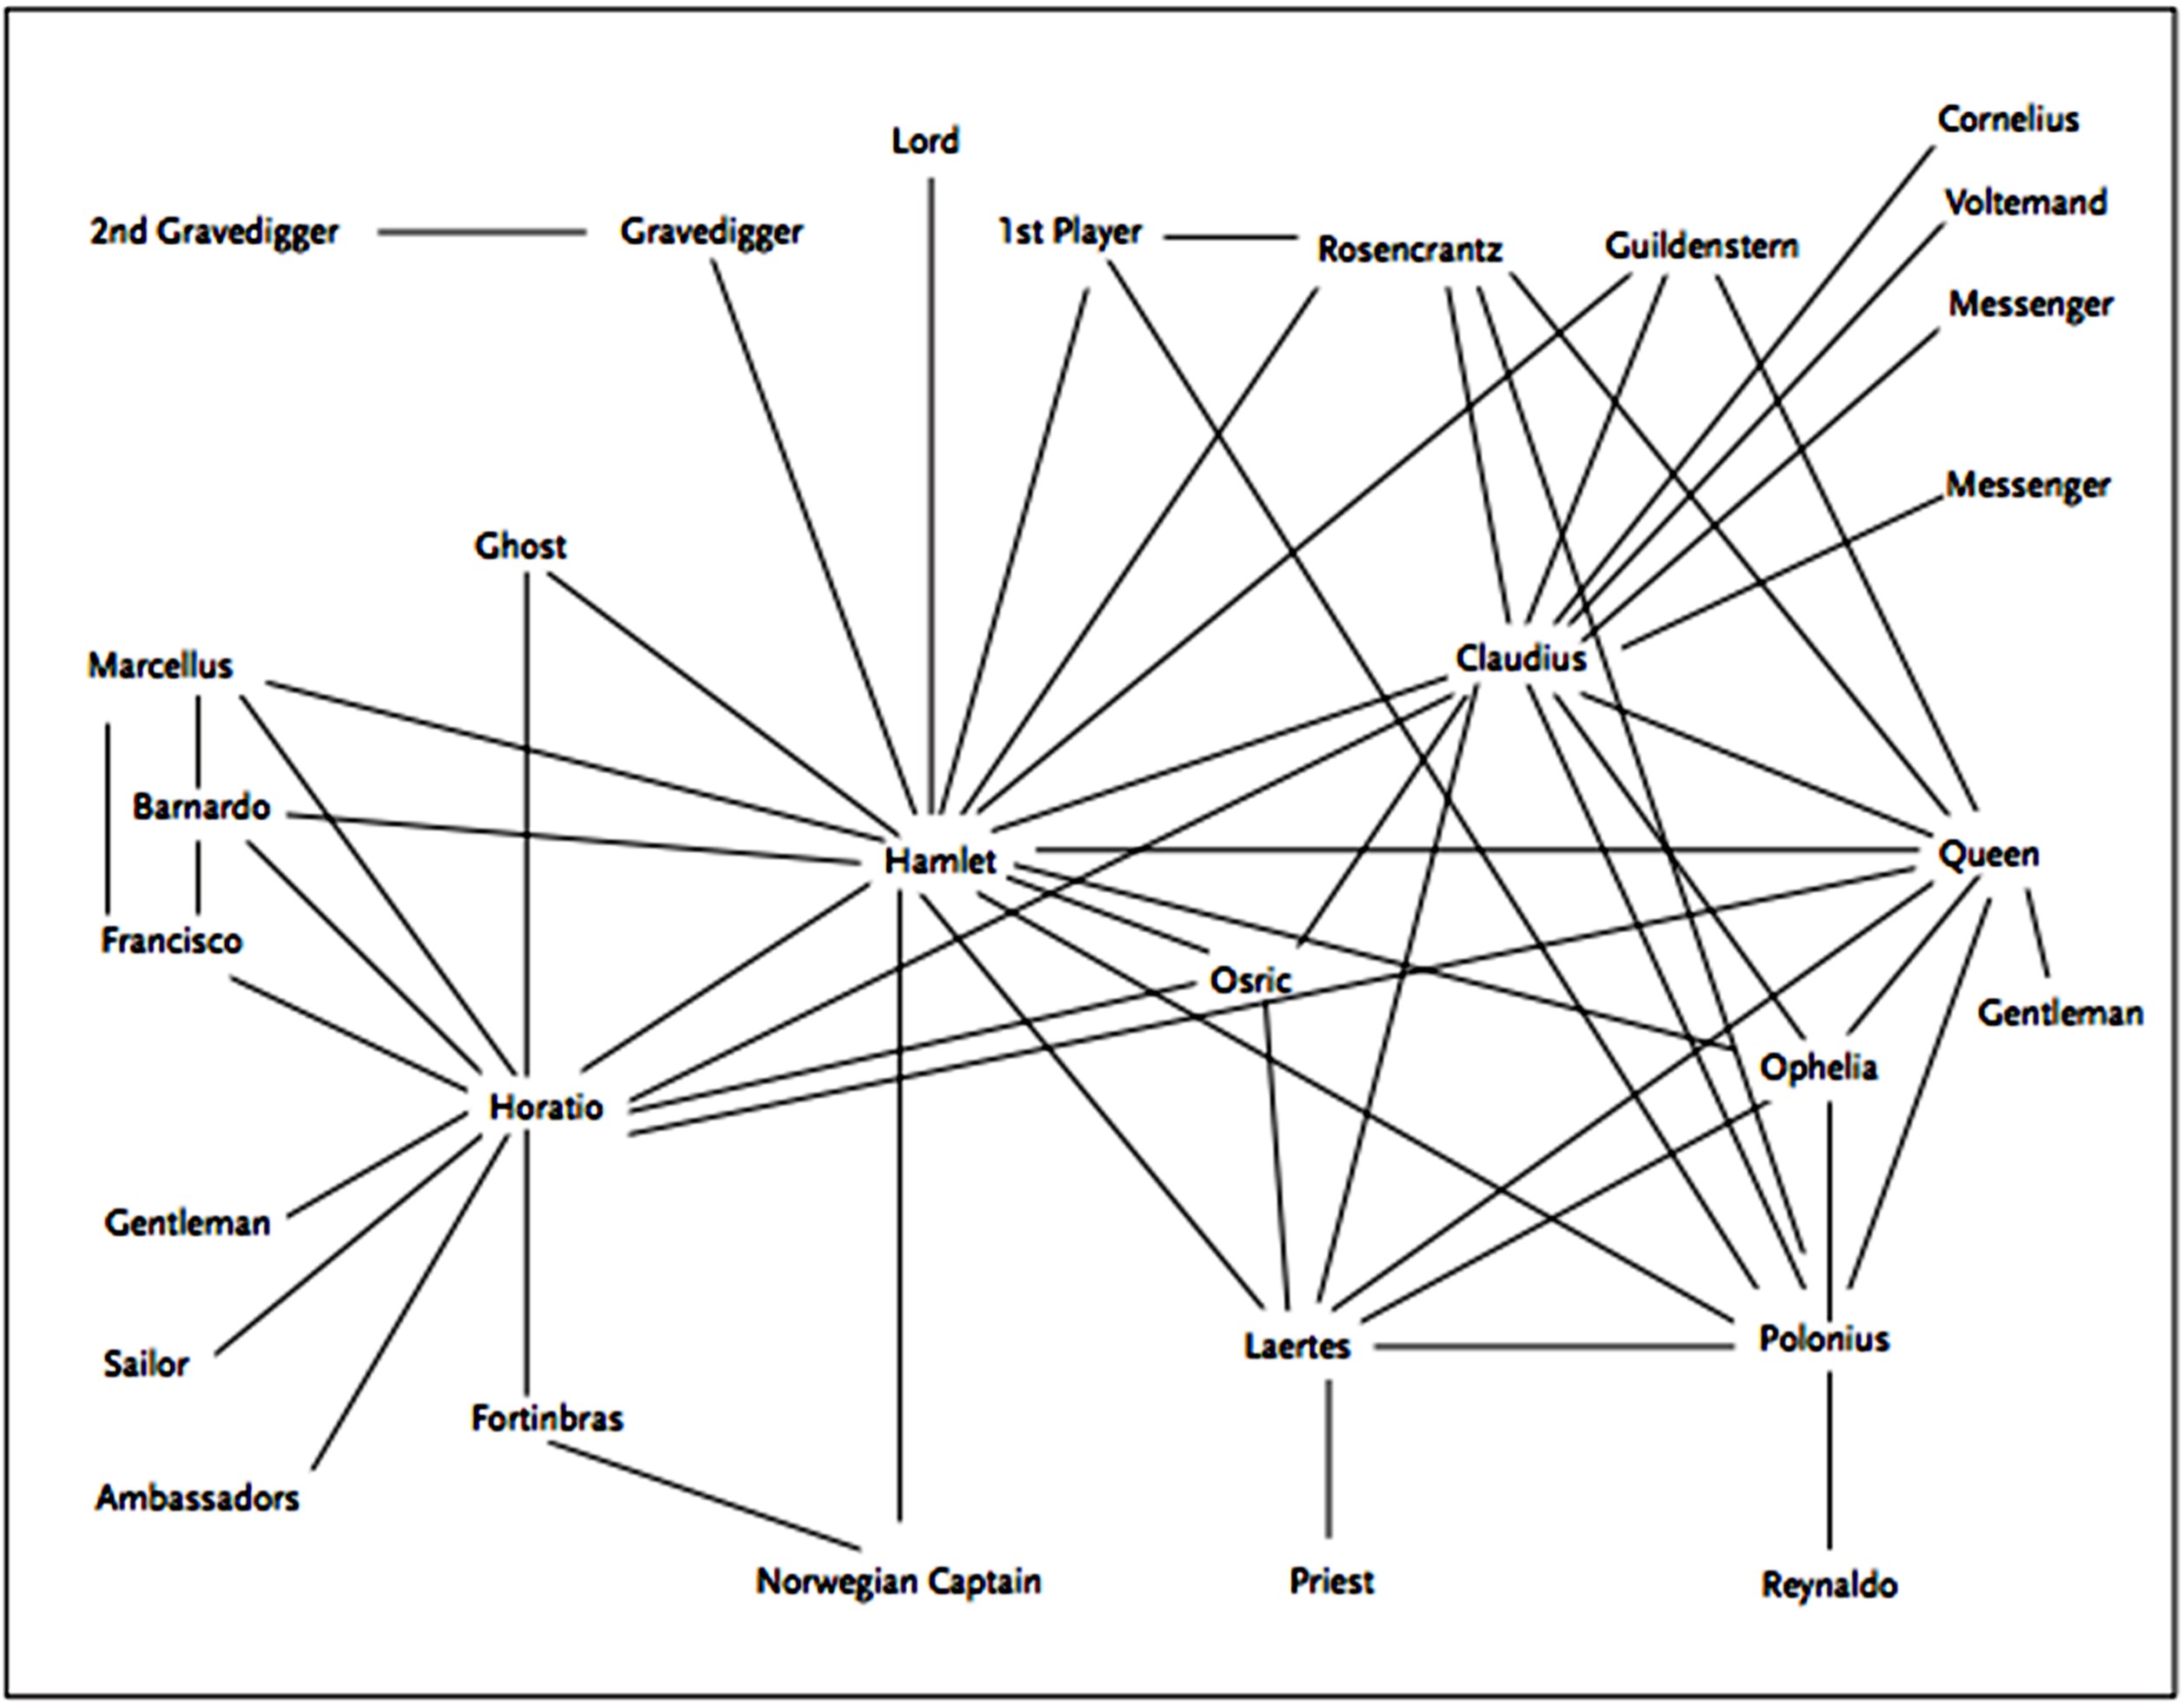 Wuthering Heights Relationship Chart